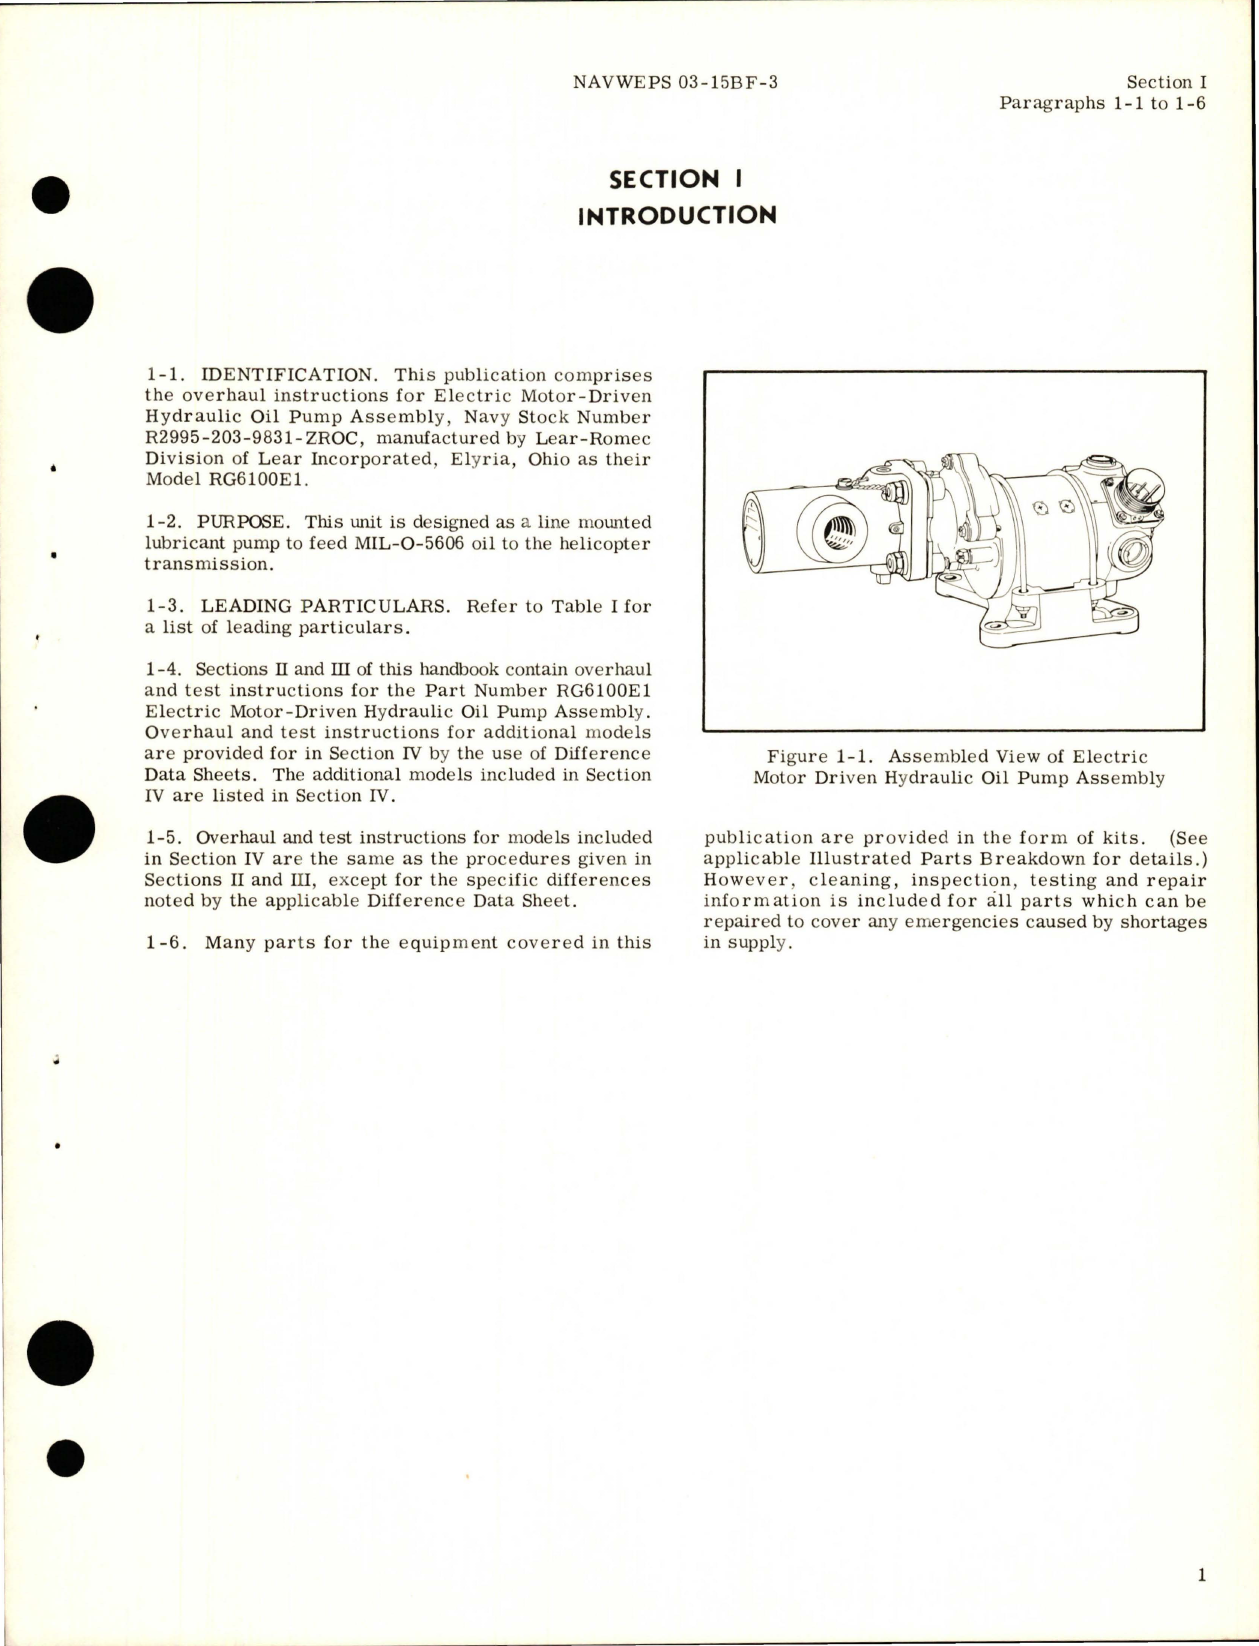 Sample page 5 from AirCorps Library document: Overhaul Instructions for Electric Motor Driven Hydraulic Oil Pump Assembly - Parts RG6100E1 and RG6100H